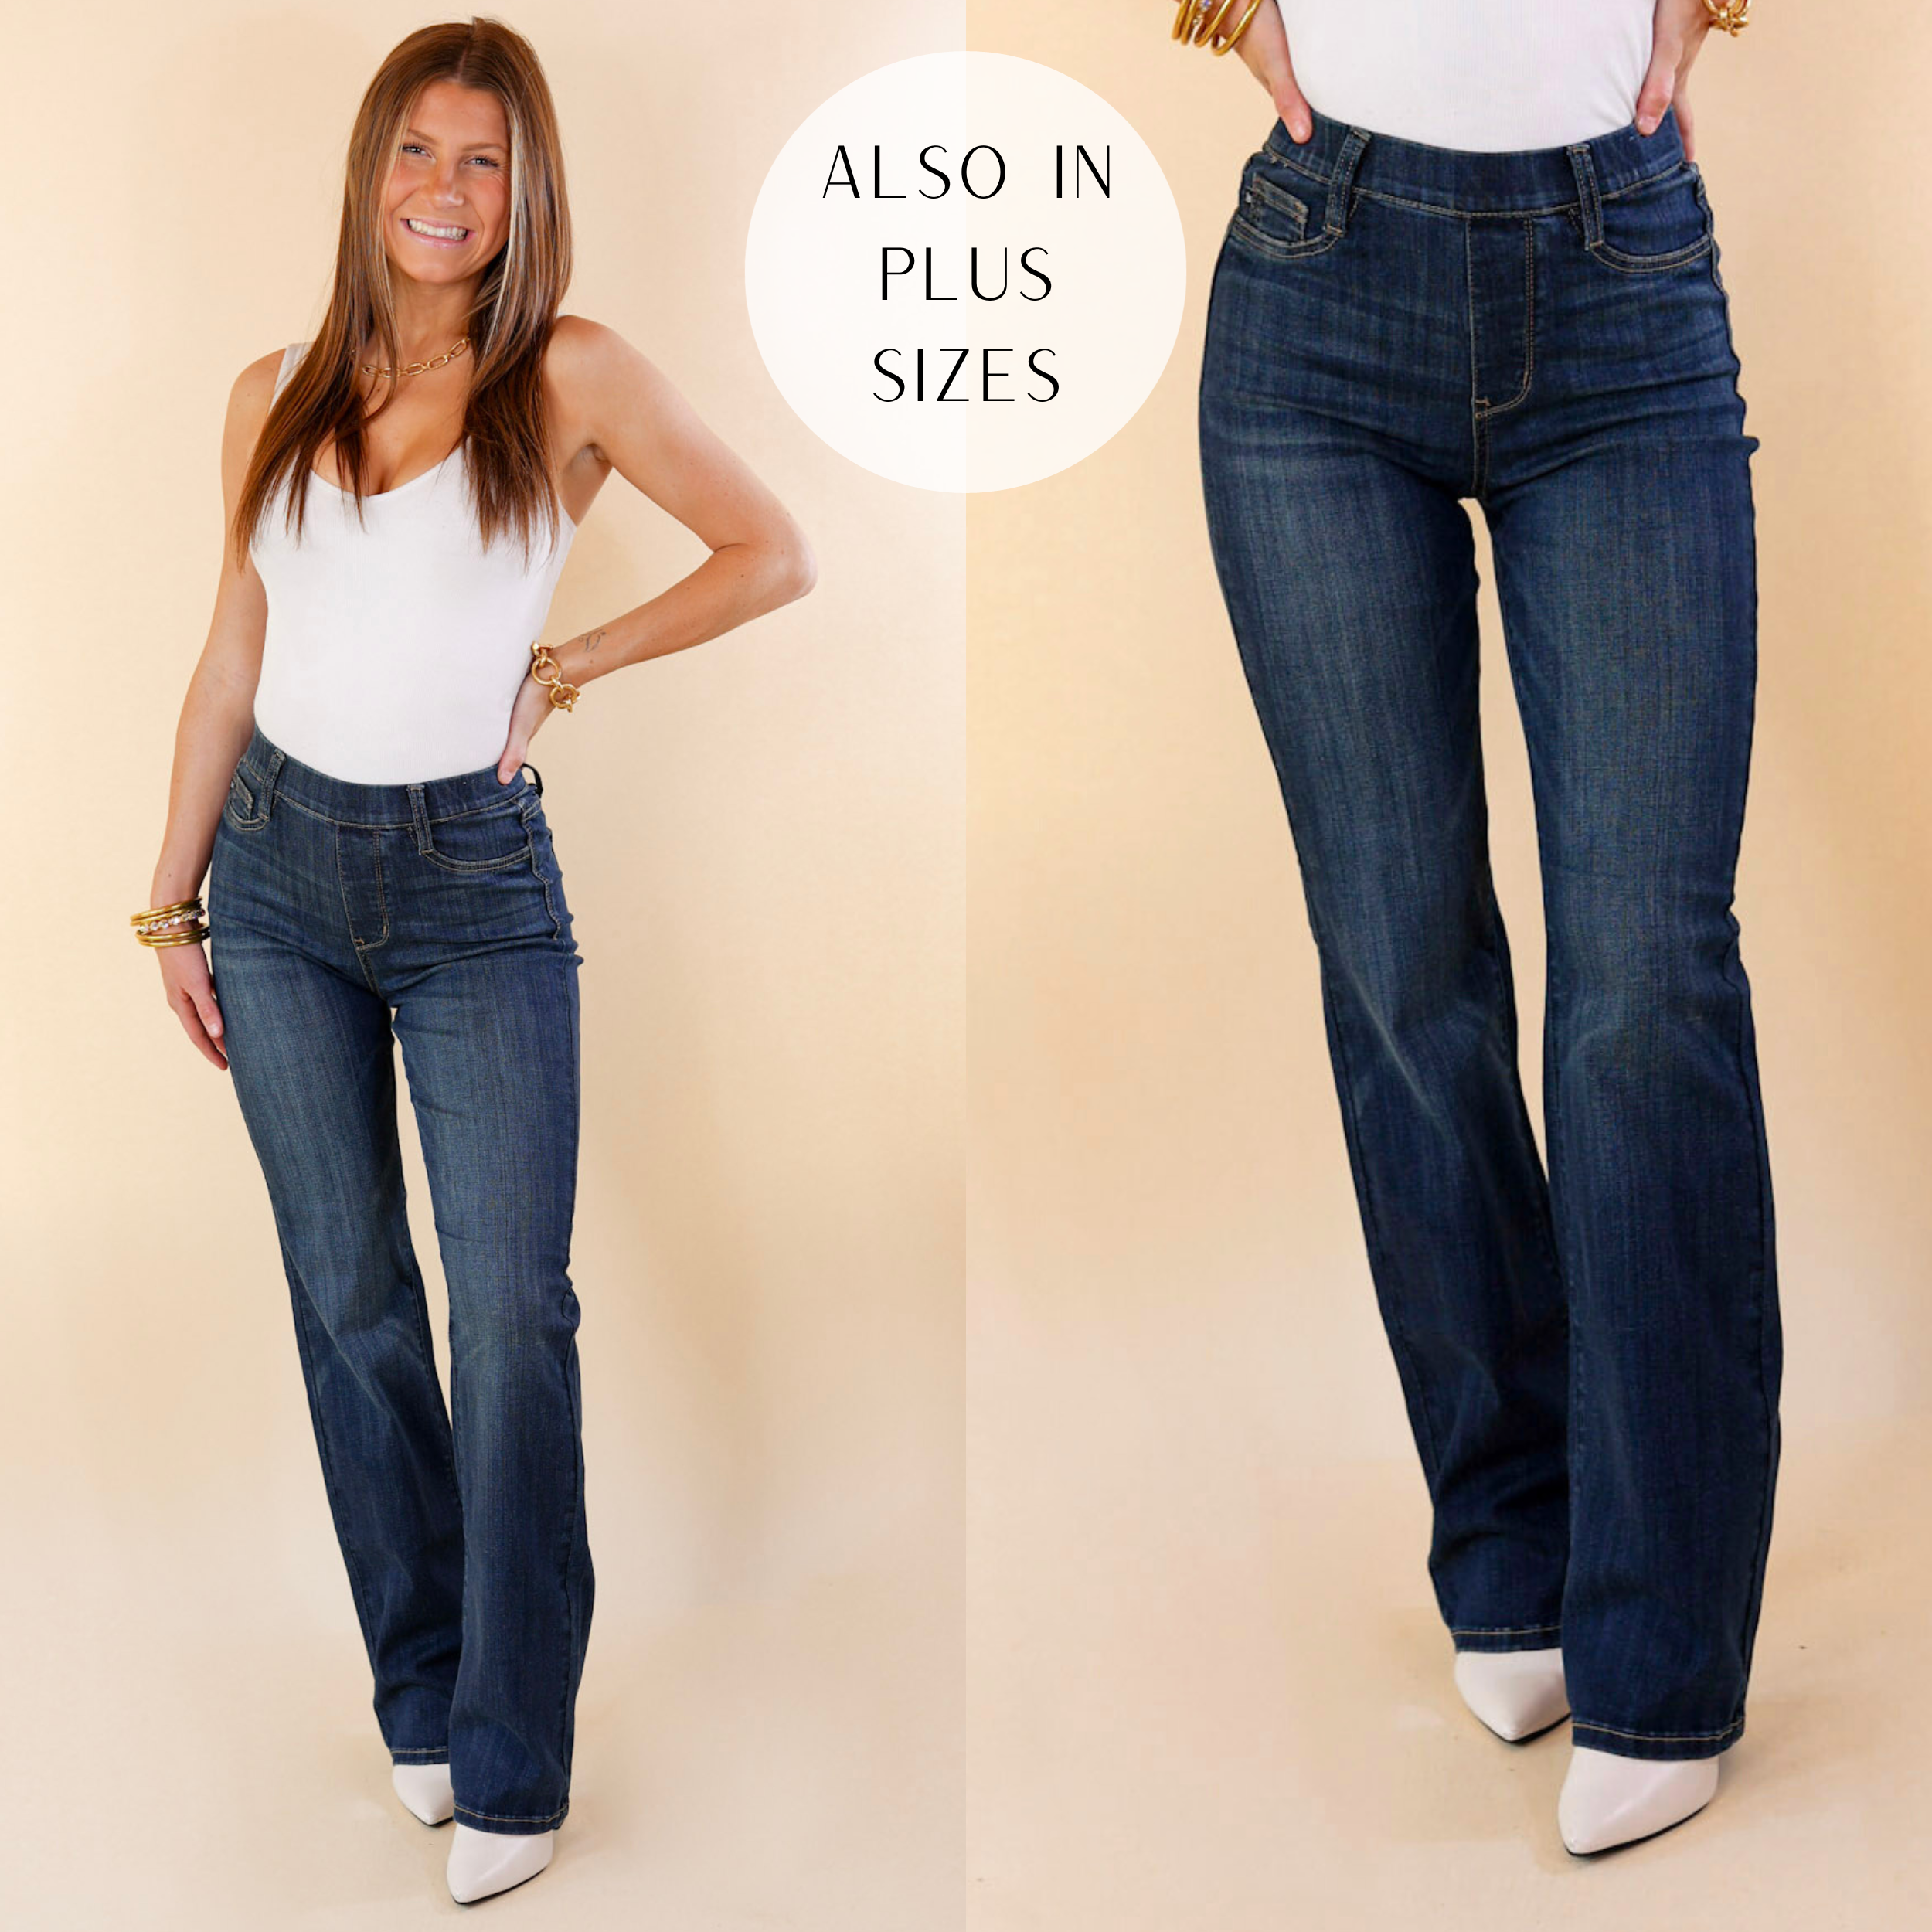 Model is wearing a pair of elastic waist bootcut jeans in dark wash. Model has it paired with a white tank top, gold jewelry, and white booties.